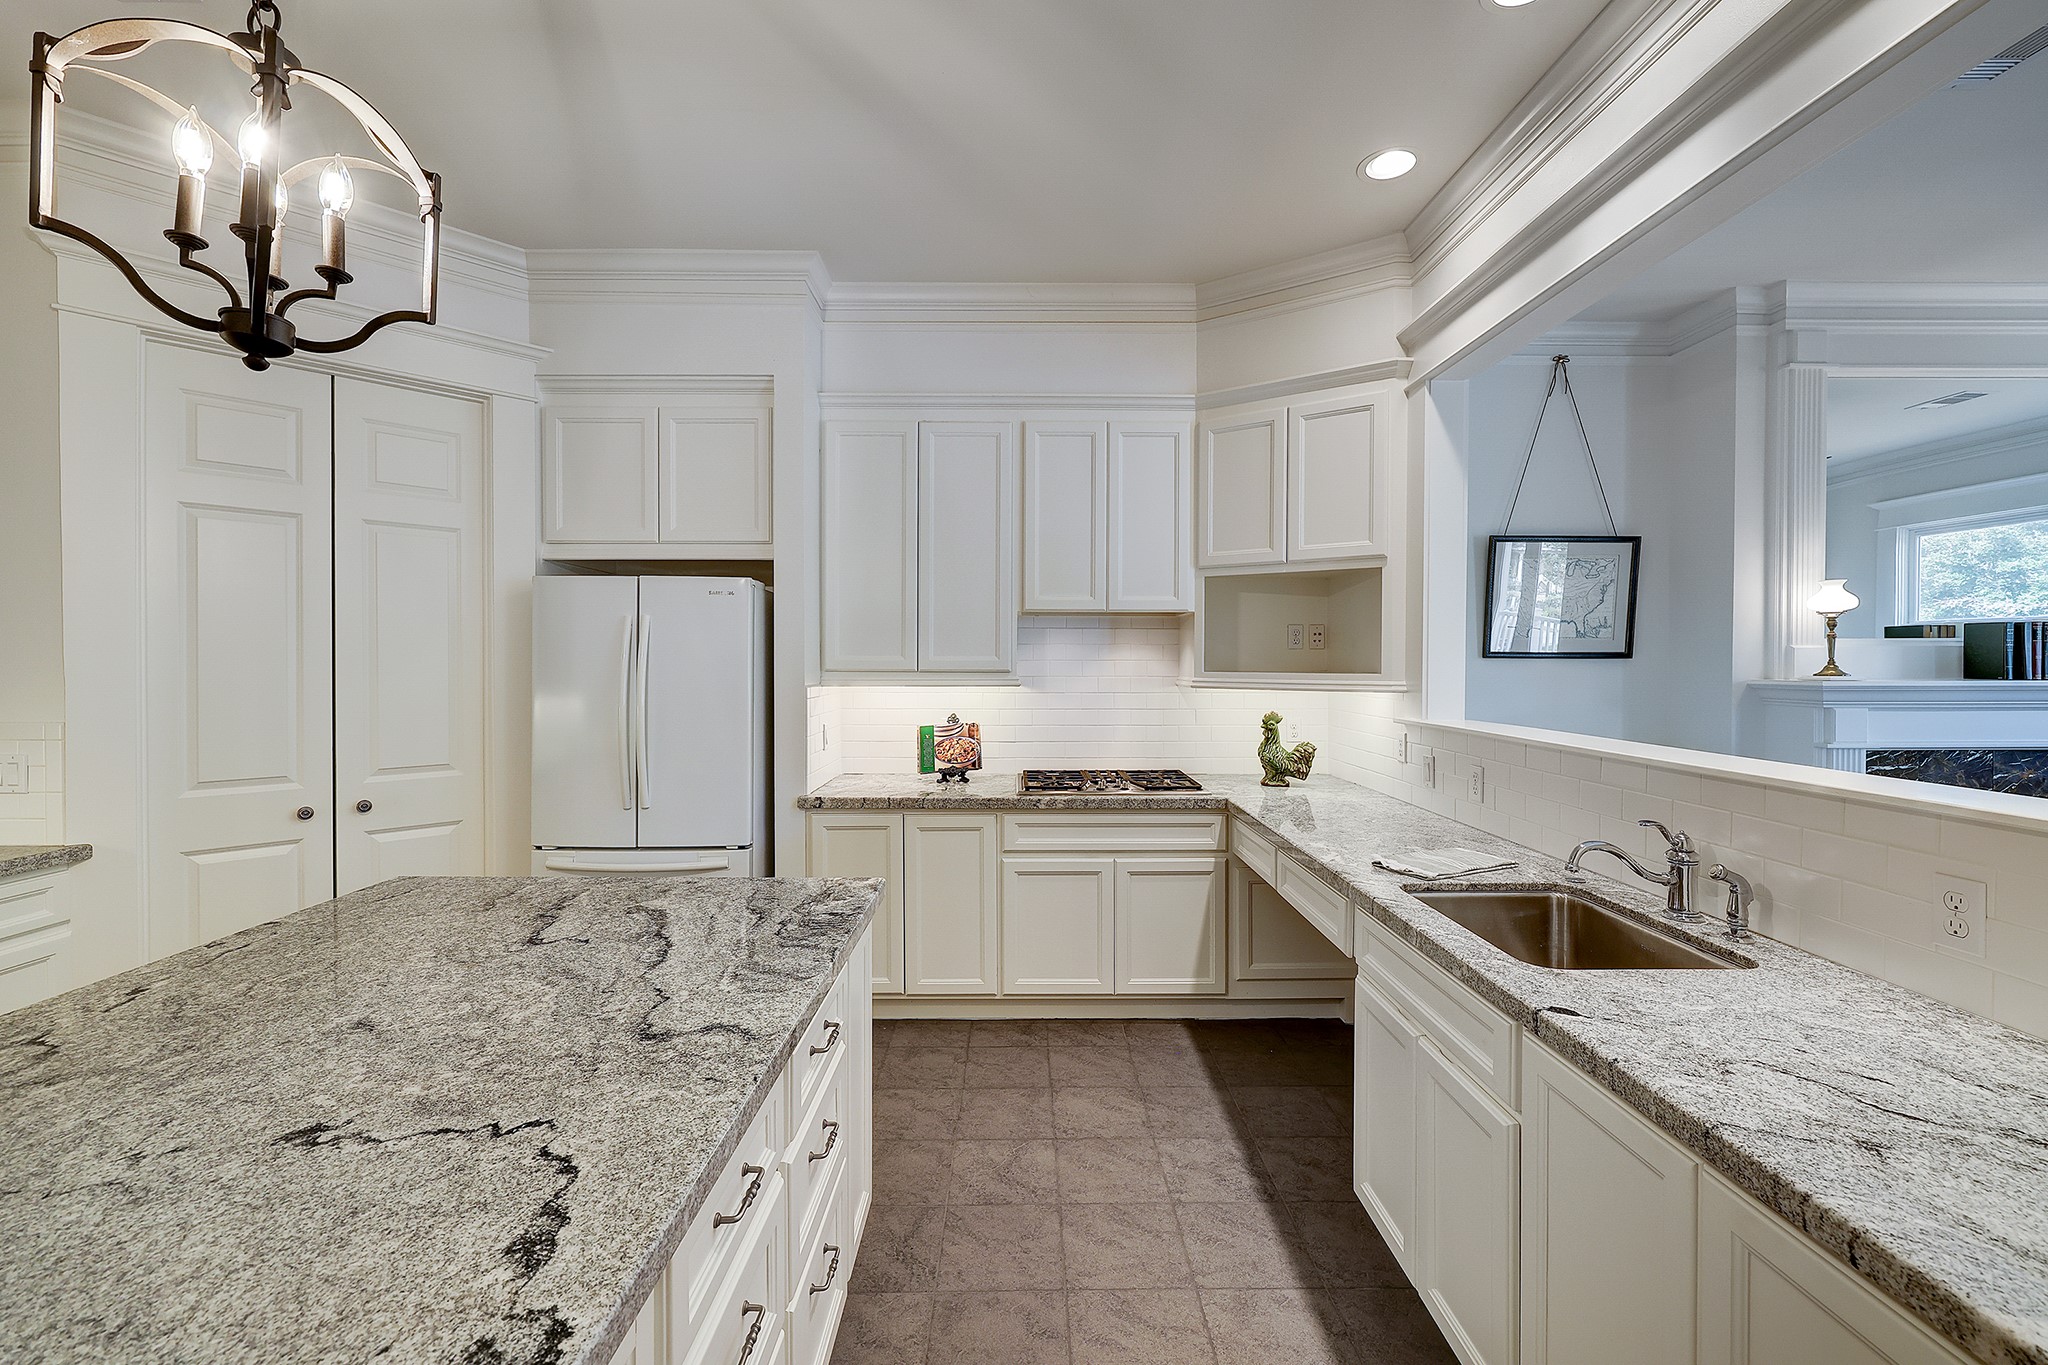 You'll be amazed at the custom designed storage throughout but especially this kitchen.